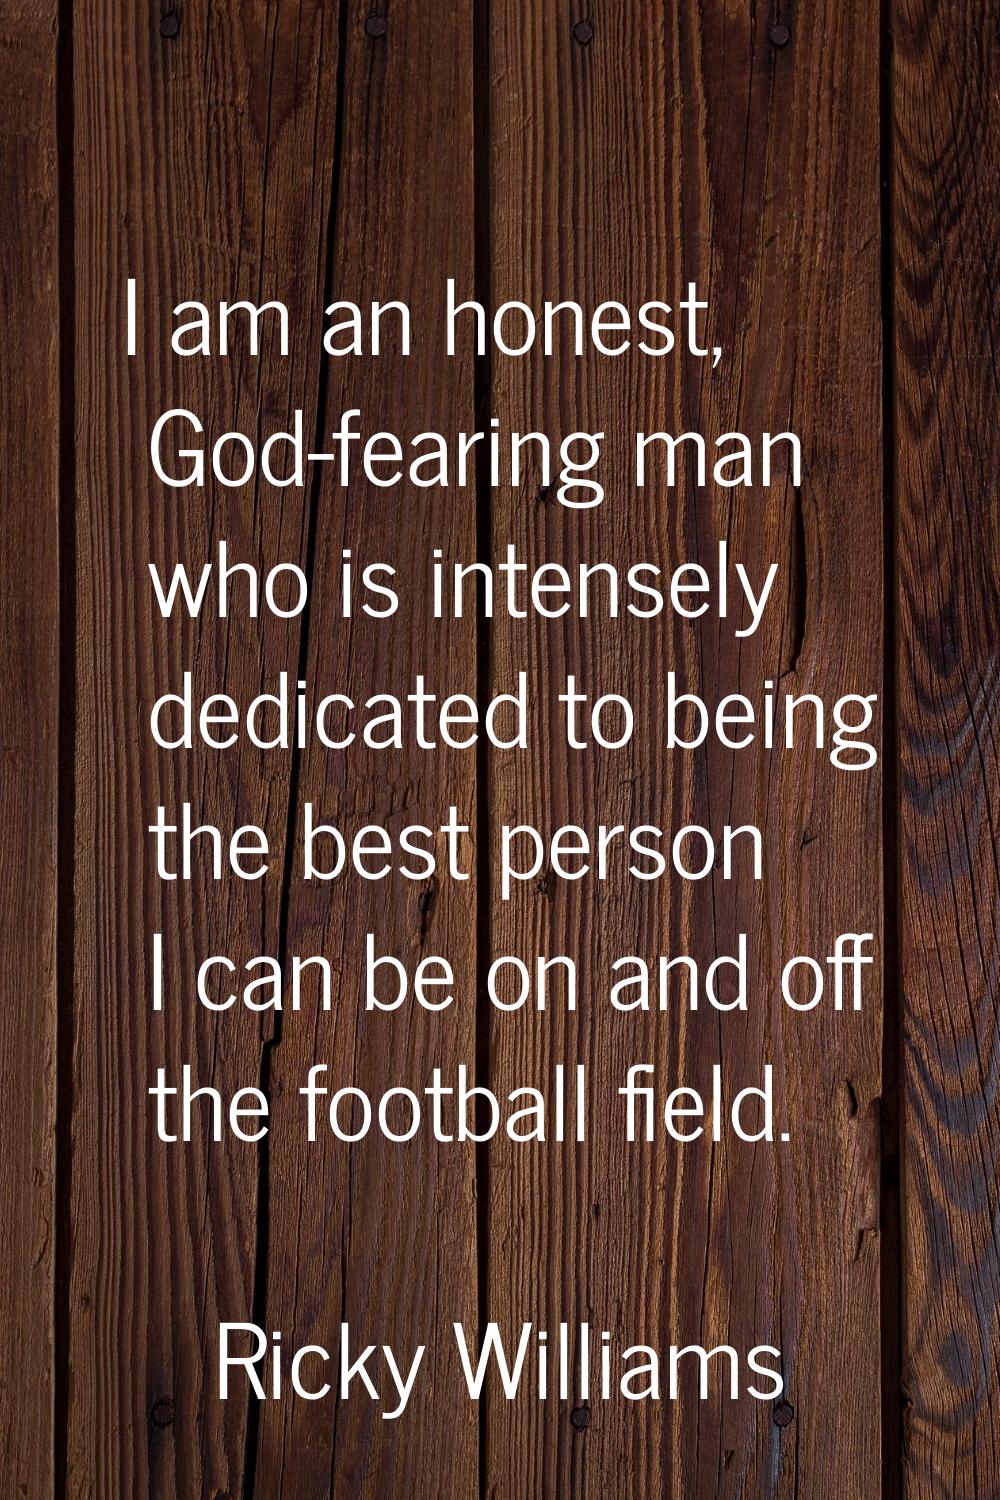 I am an honest, God-fearing man who is intensely dedicated to being the best person I can be on and